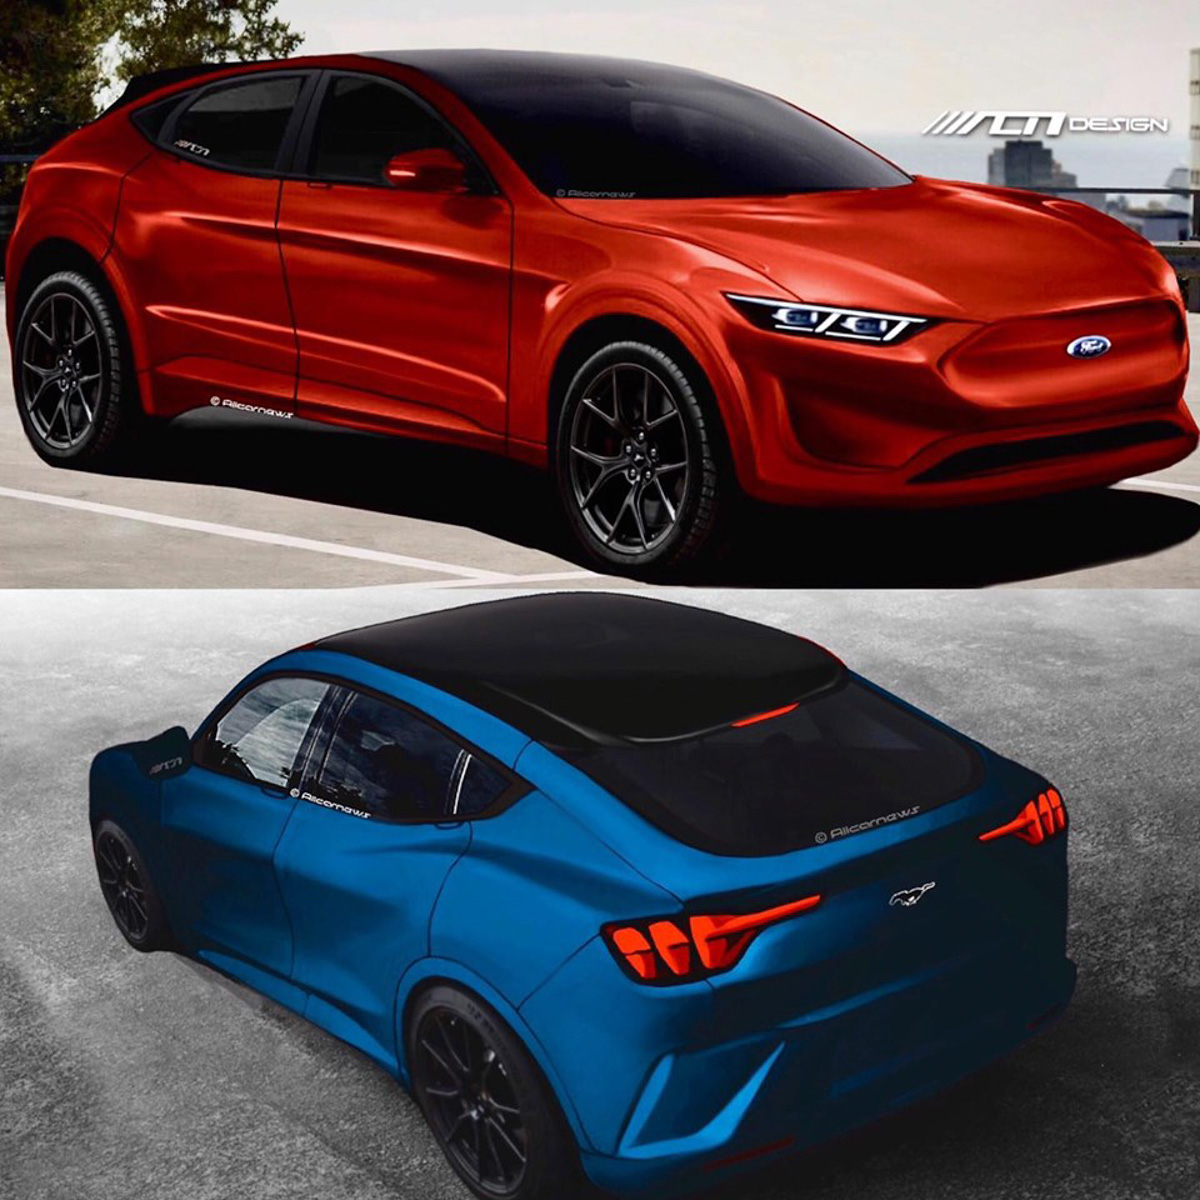 Ford Mustang Crossover 设计图曝光，11月18日正式发表